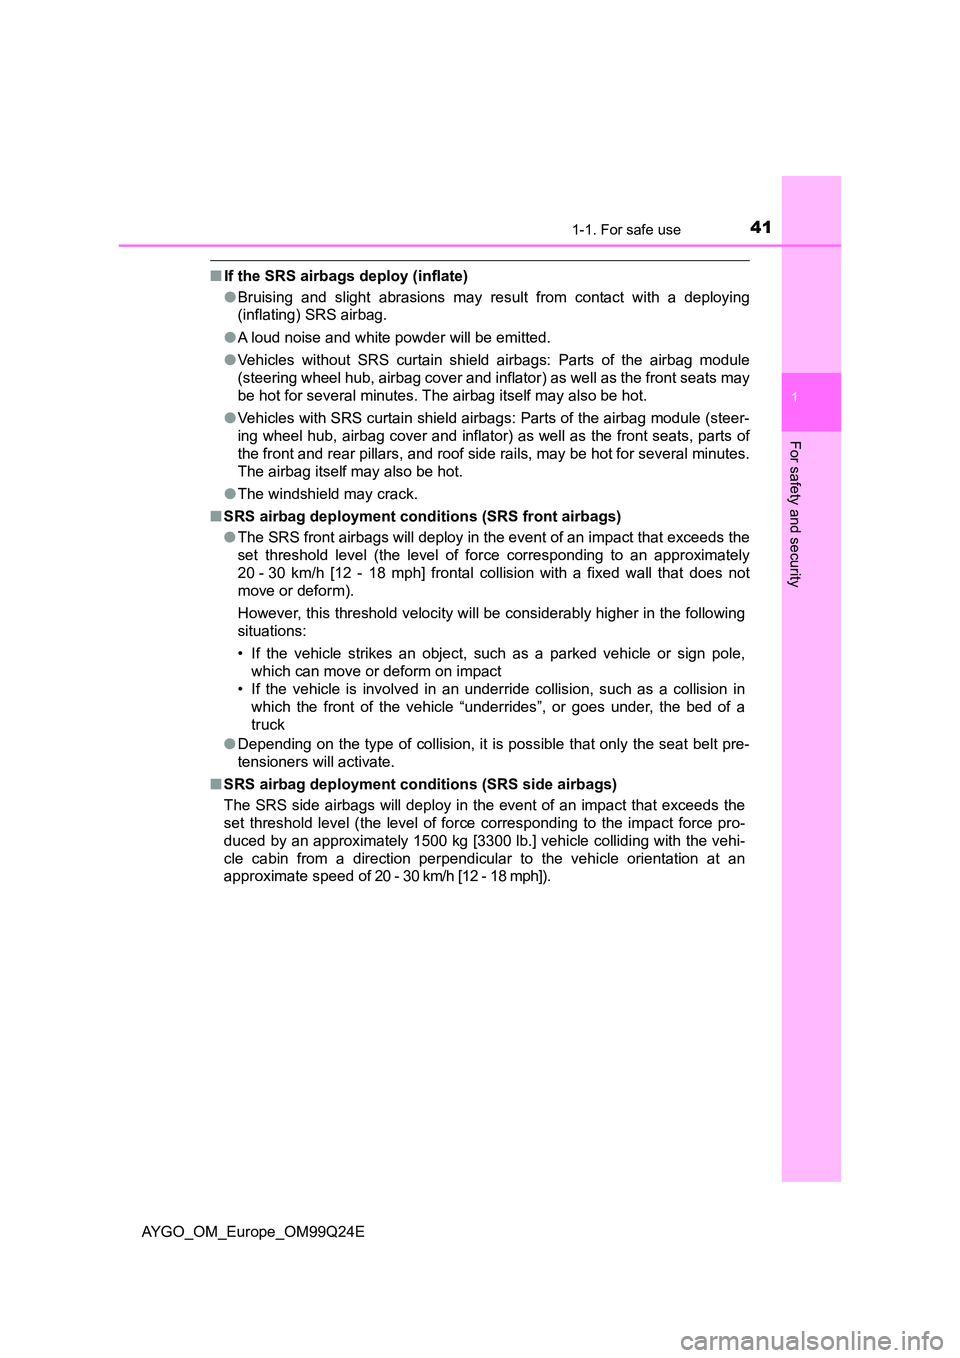 TOYOTA AYGO 2017  Owners Manual (in English) 411-1. For safe use
1
For safety and security
AYGO_OM_Europe_OM99Q24E
■If the SRS airbags deploy (inflate) 
● Bruising and slight abrasions may result from contact with a deploying 
(inflating) SR